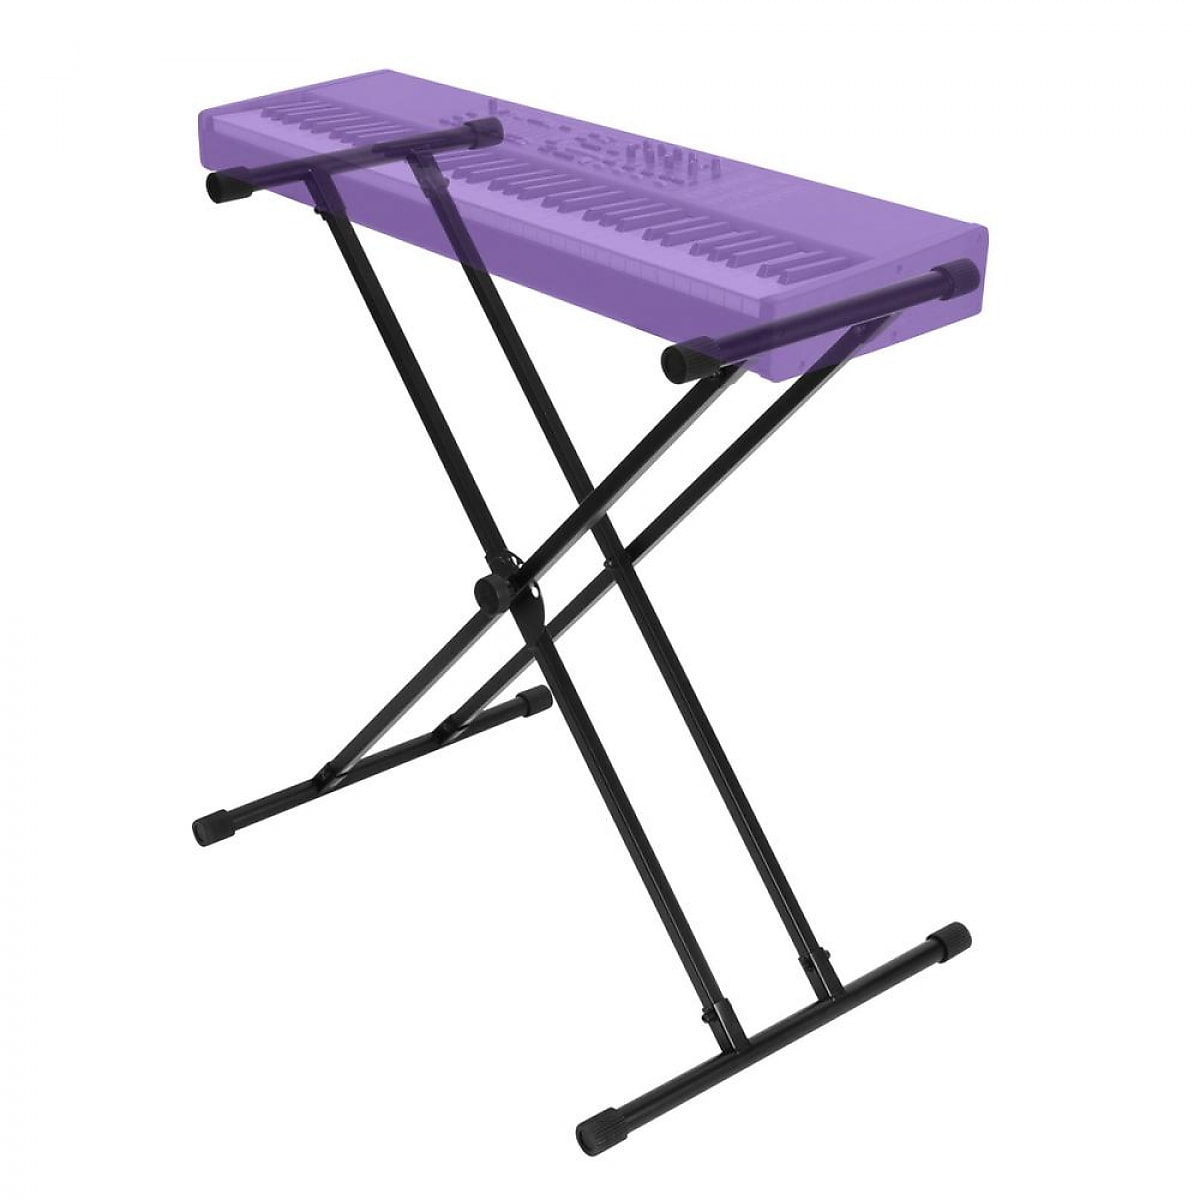 On-Stage KS8191XX Double-X Bullet Nose Keyboard Stand w/ Lok-Tight Construction